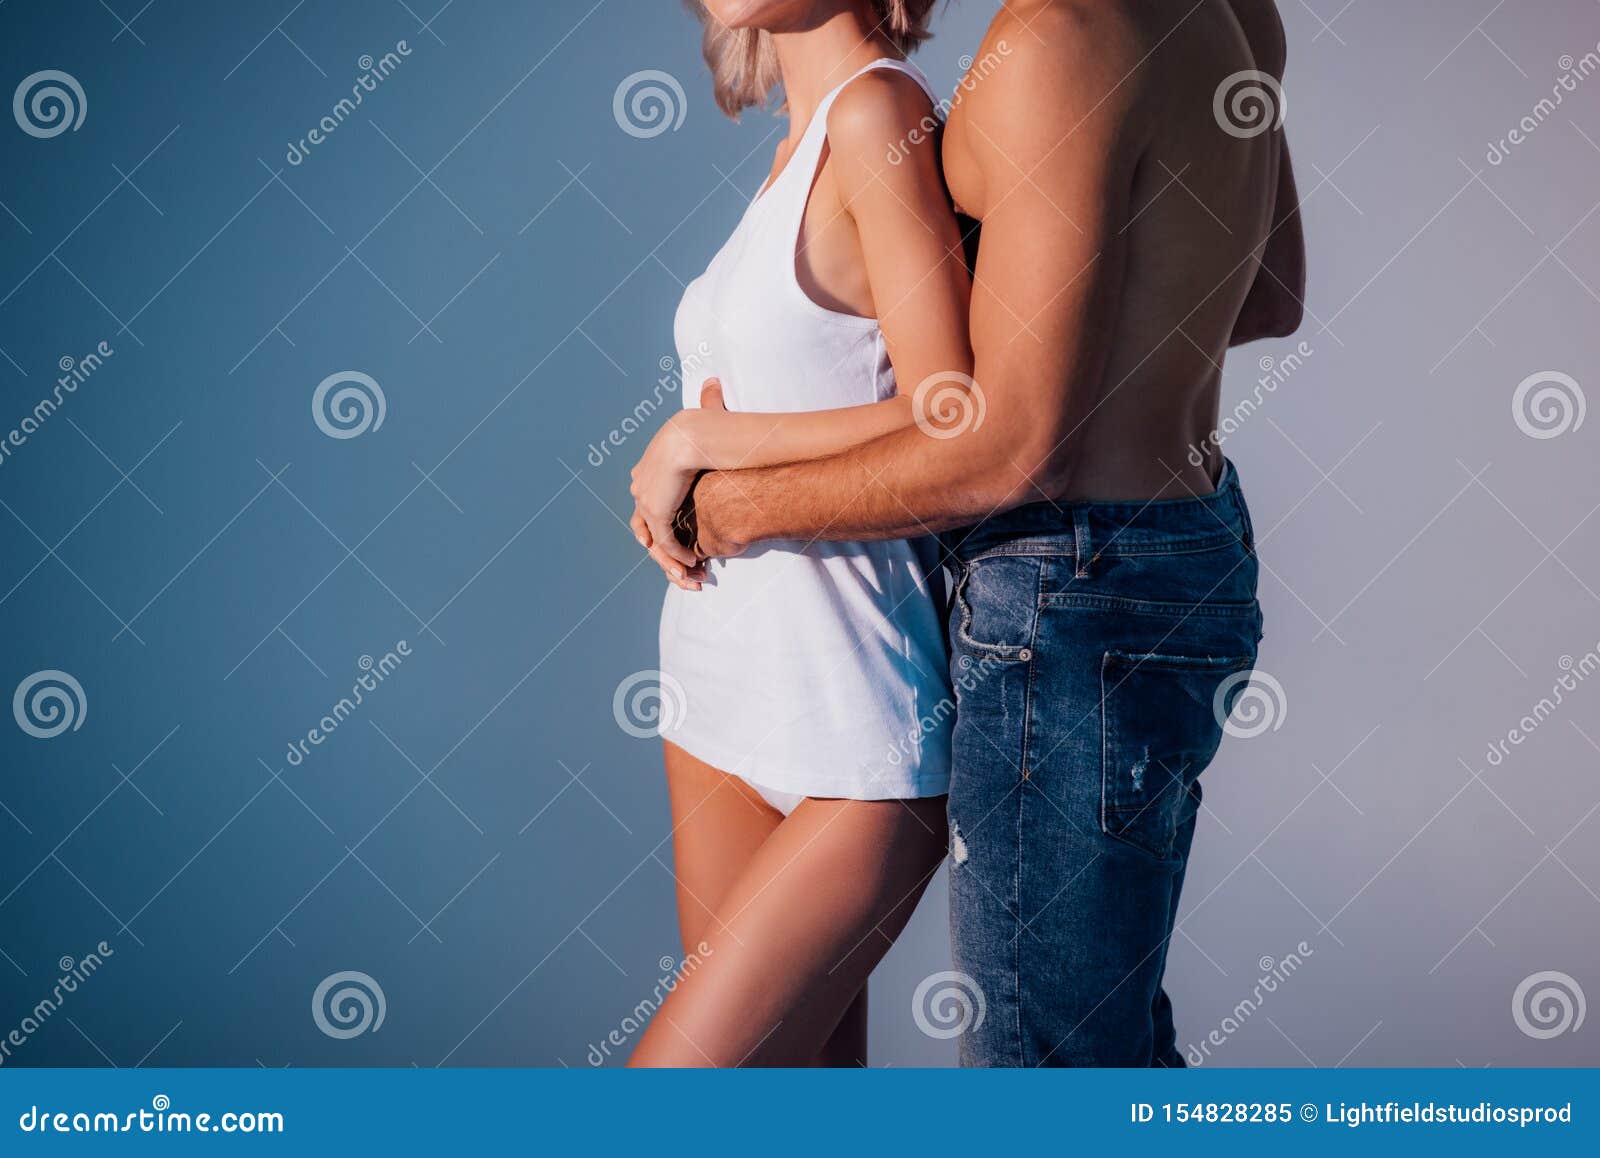 Cropped View Of Shirtless Man Hugging Woman From Behind Stock Image